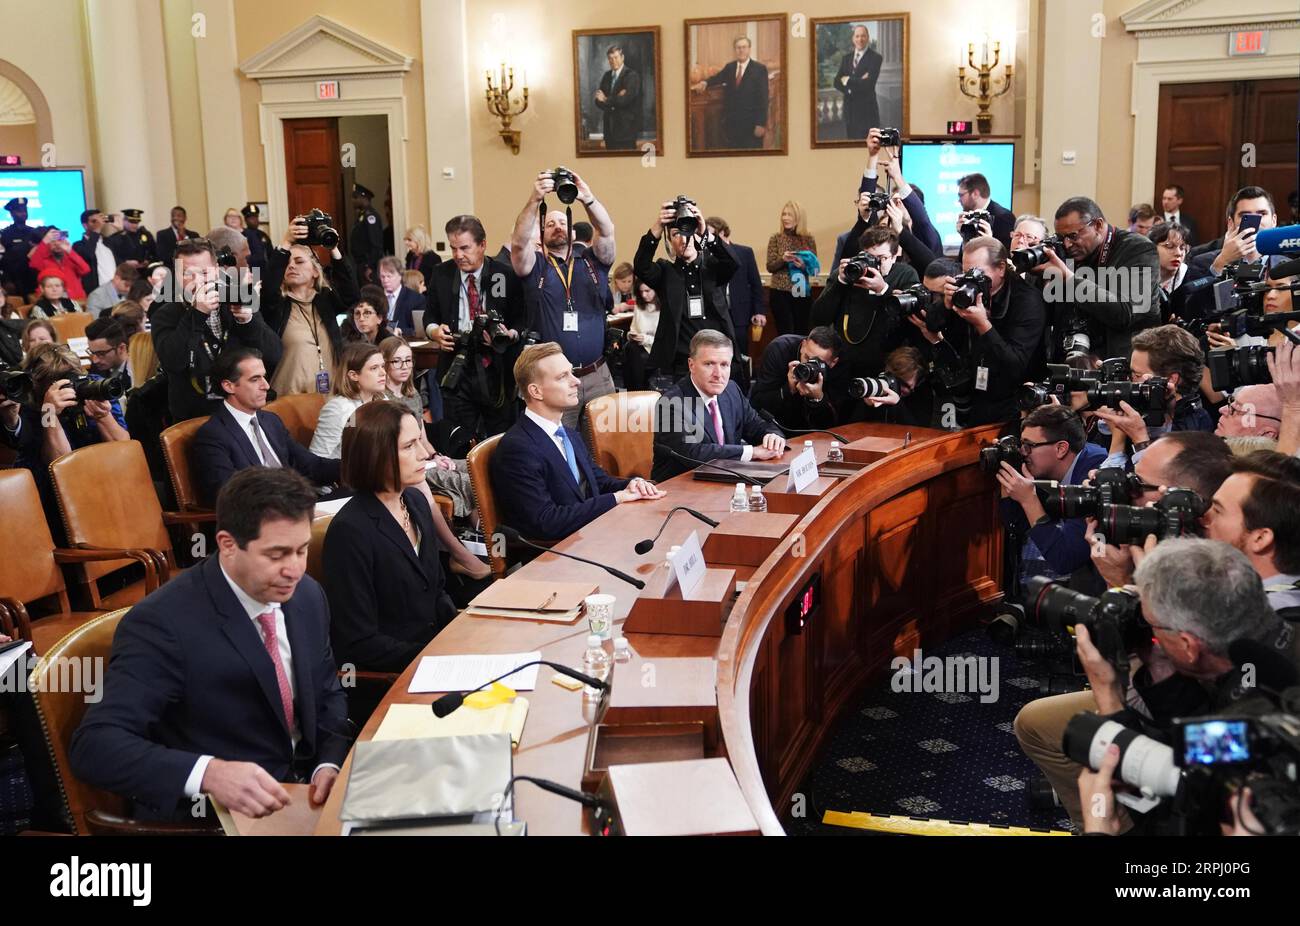 191122 -- WASHINGTON, Nov. 22, 2019 -- Fiona Hill 2nd L in the front row, former National Security Council senior director for Europe and Russia, and David Holmes 3rd L in the front row, a staffer from the U.S. Embassy in Ukraine, wait to testify before the U.S. House Intelligence Committee on Capitol Hill in Washington D.C., the United States, on Nov. 21, 2019. The last two witnesses scheduled for publicly testifying before a House panel as part of an impeachment inquiry into U.S. President Donald Trump offered their narratives of events relating to the investigation on Thursday.  U.S.-WASHIN Stock Photo